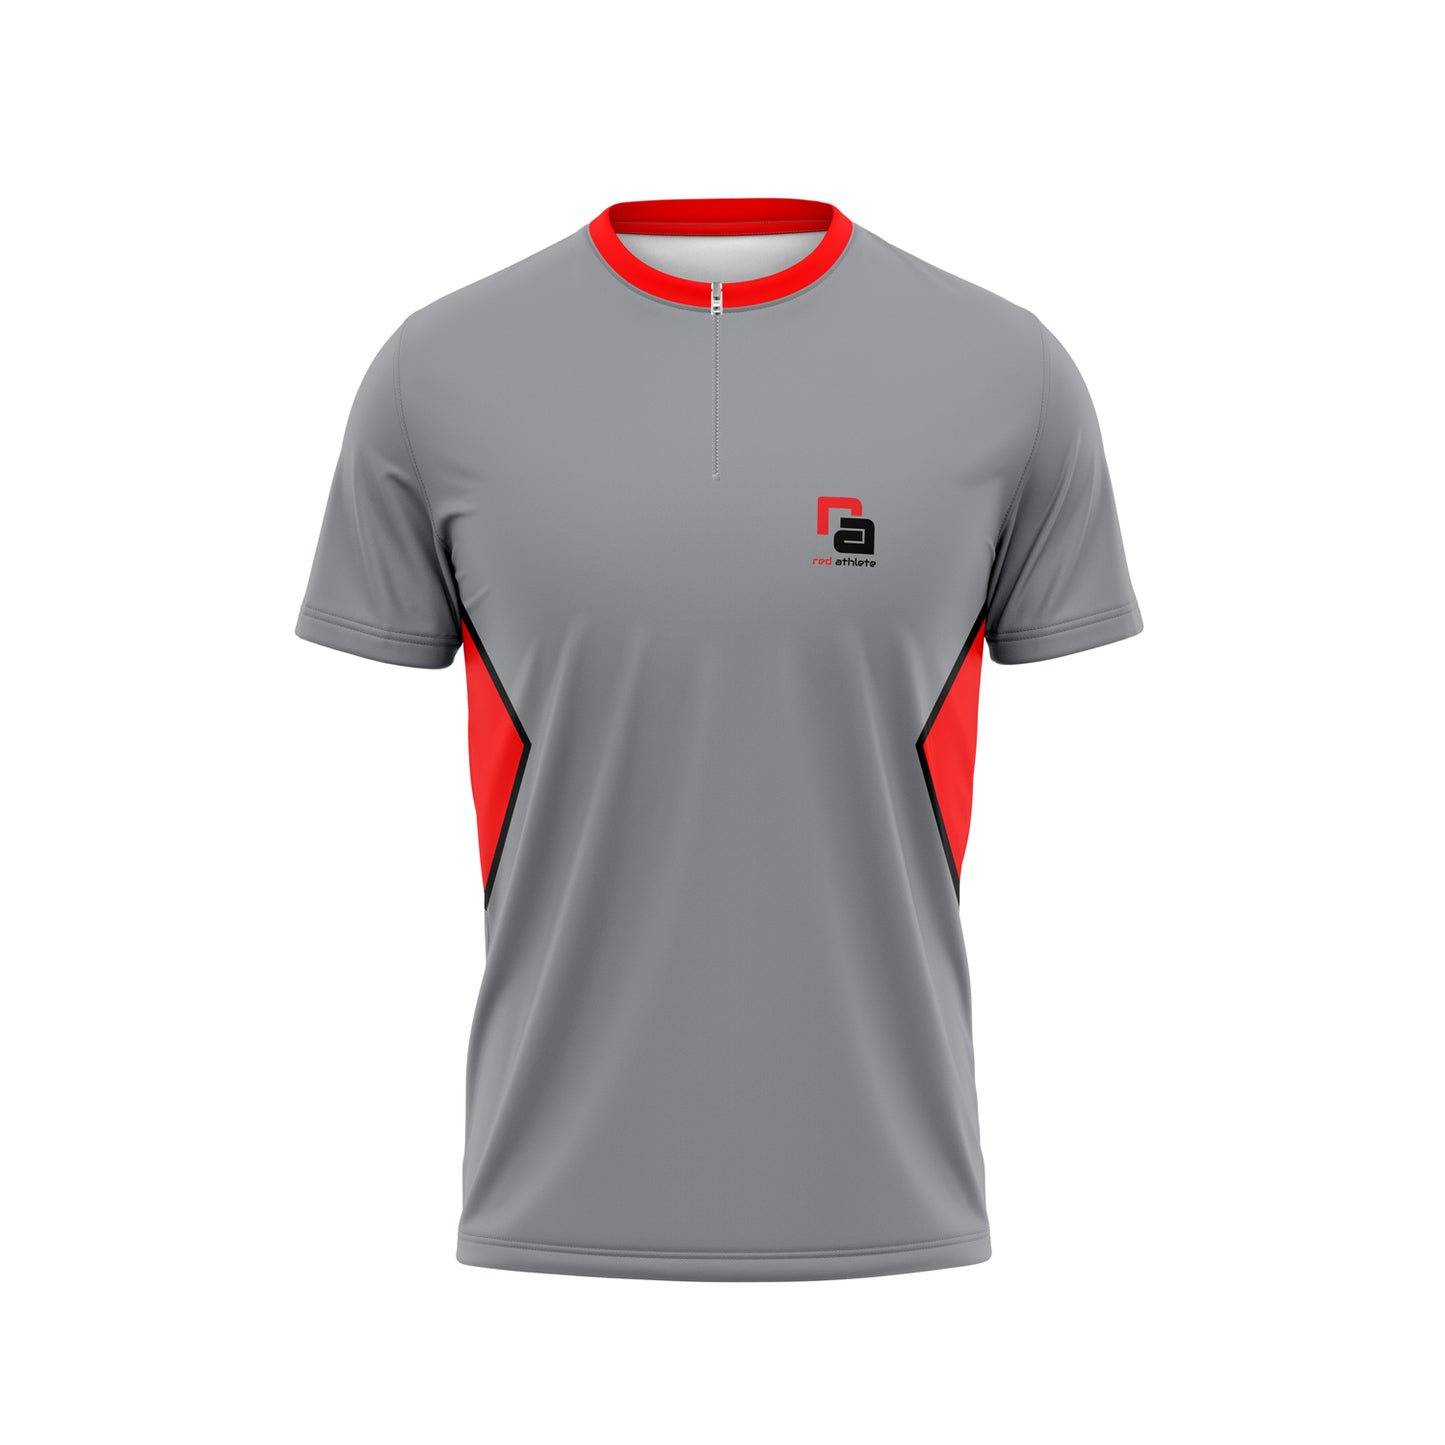 Red Athlete Coach's Shirt - Gray/Red